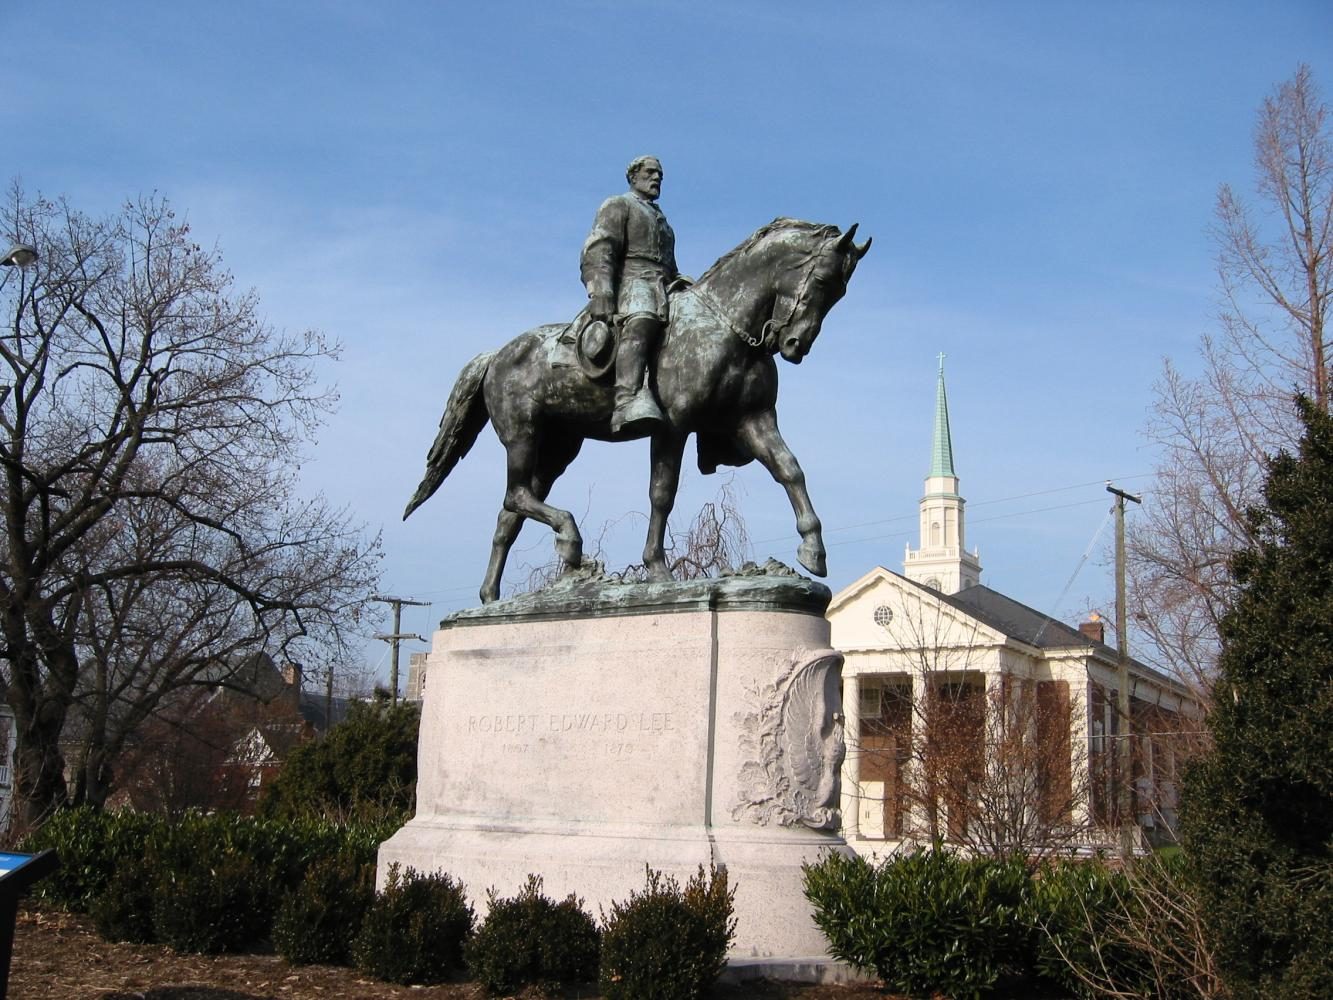 The “Unite the Right” rally initially took place at this statue in an effort by various far-right groups to prevent the sculpture from being torn down and preserve Confederate heritage.